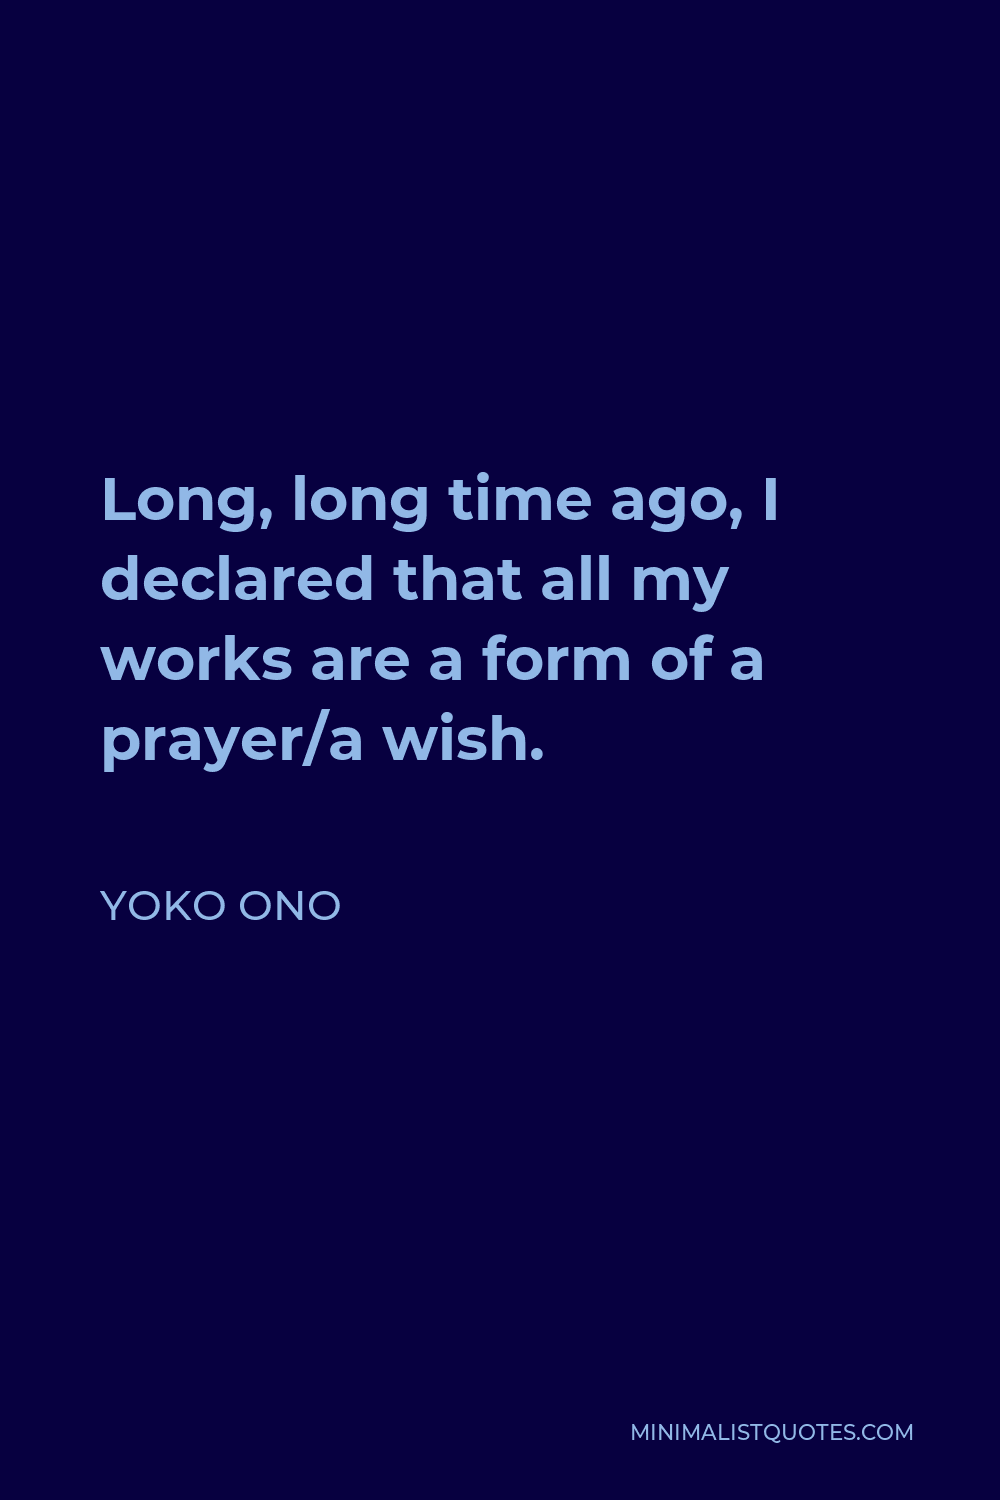 Yoko Ono Quote - Long, long time ago, I declared that all my works are a form of a prayer/a wish.